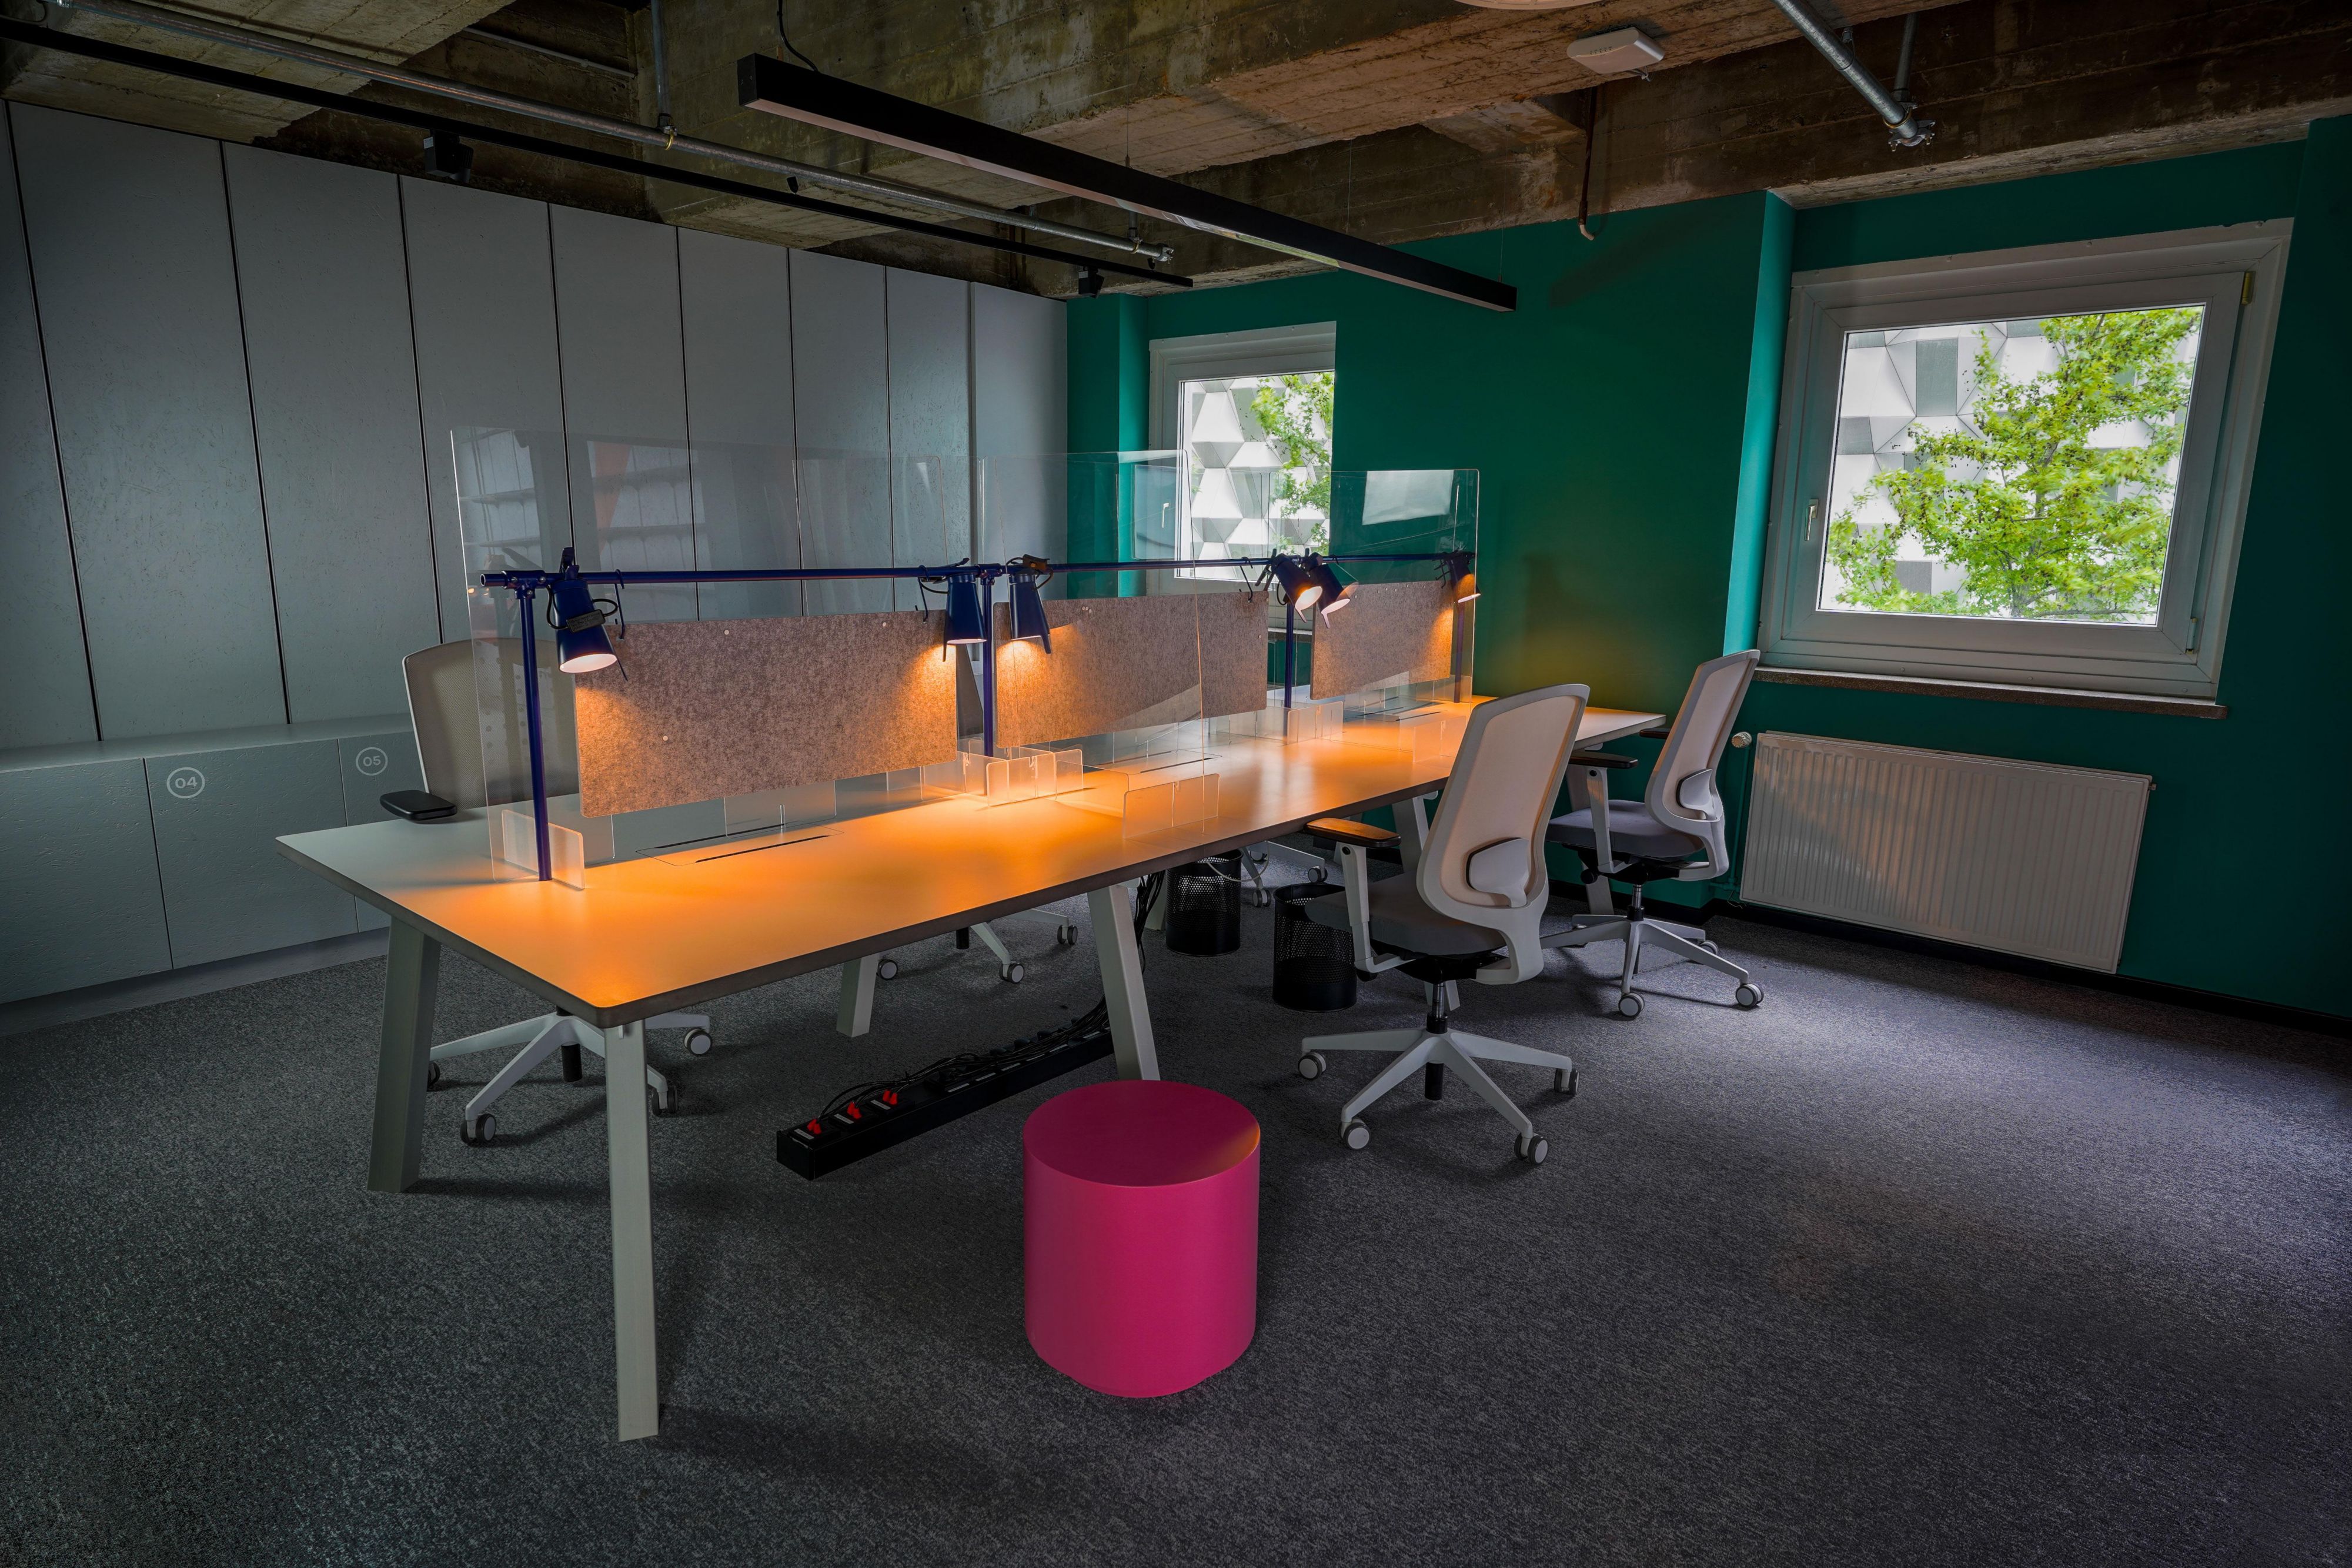 Are you a start up company looking for your first office space, or is it simply time to expand? Contact the team to discuss our co-working facility located in our dedicated business floor and flooded with natural day light. Our space could be your space!